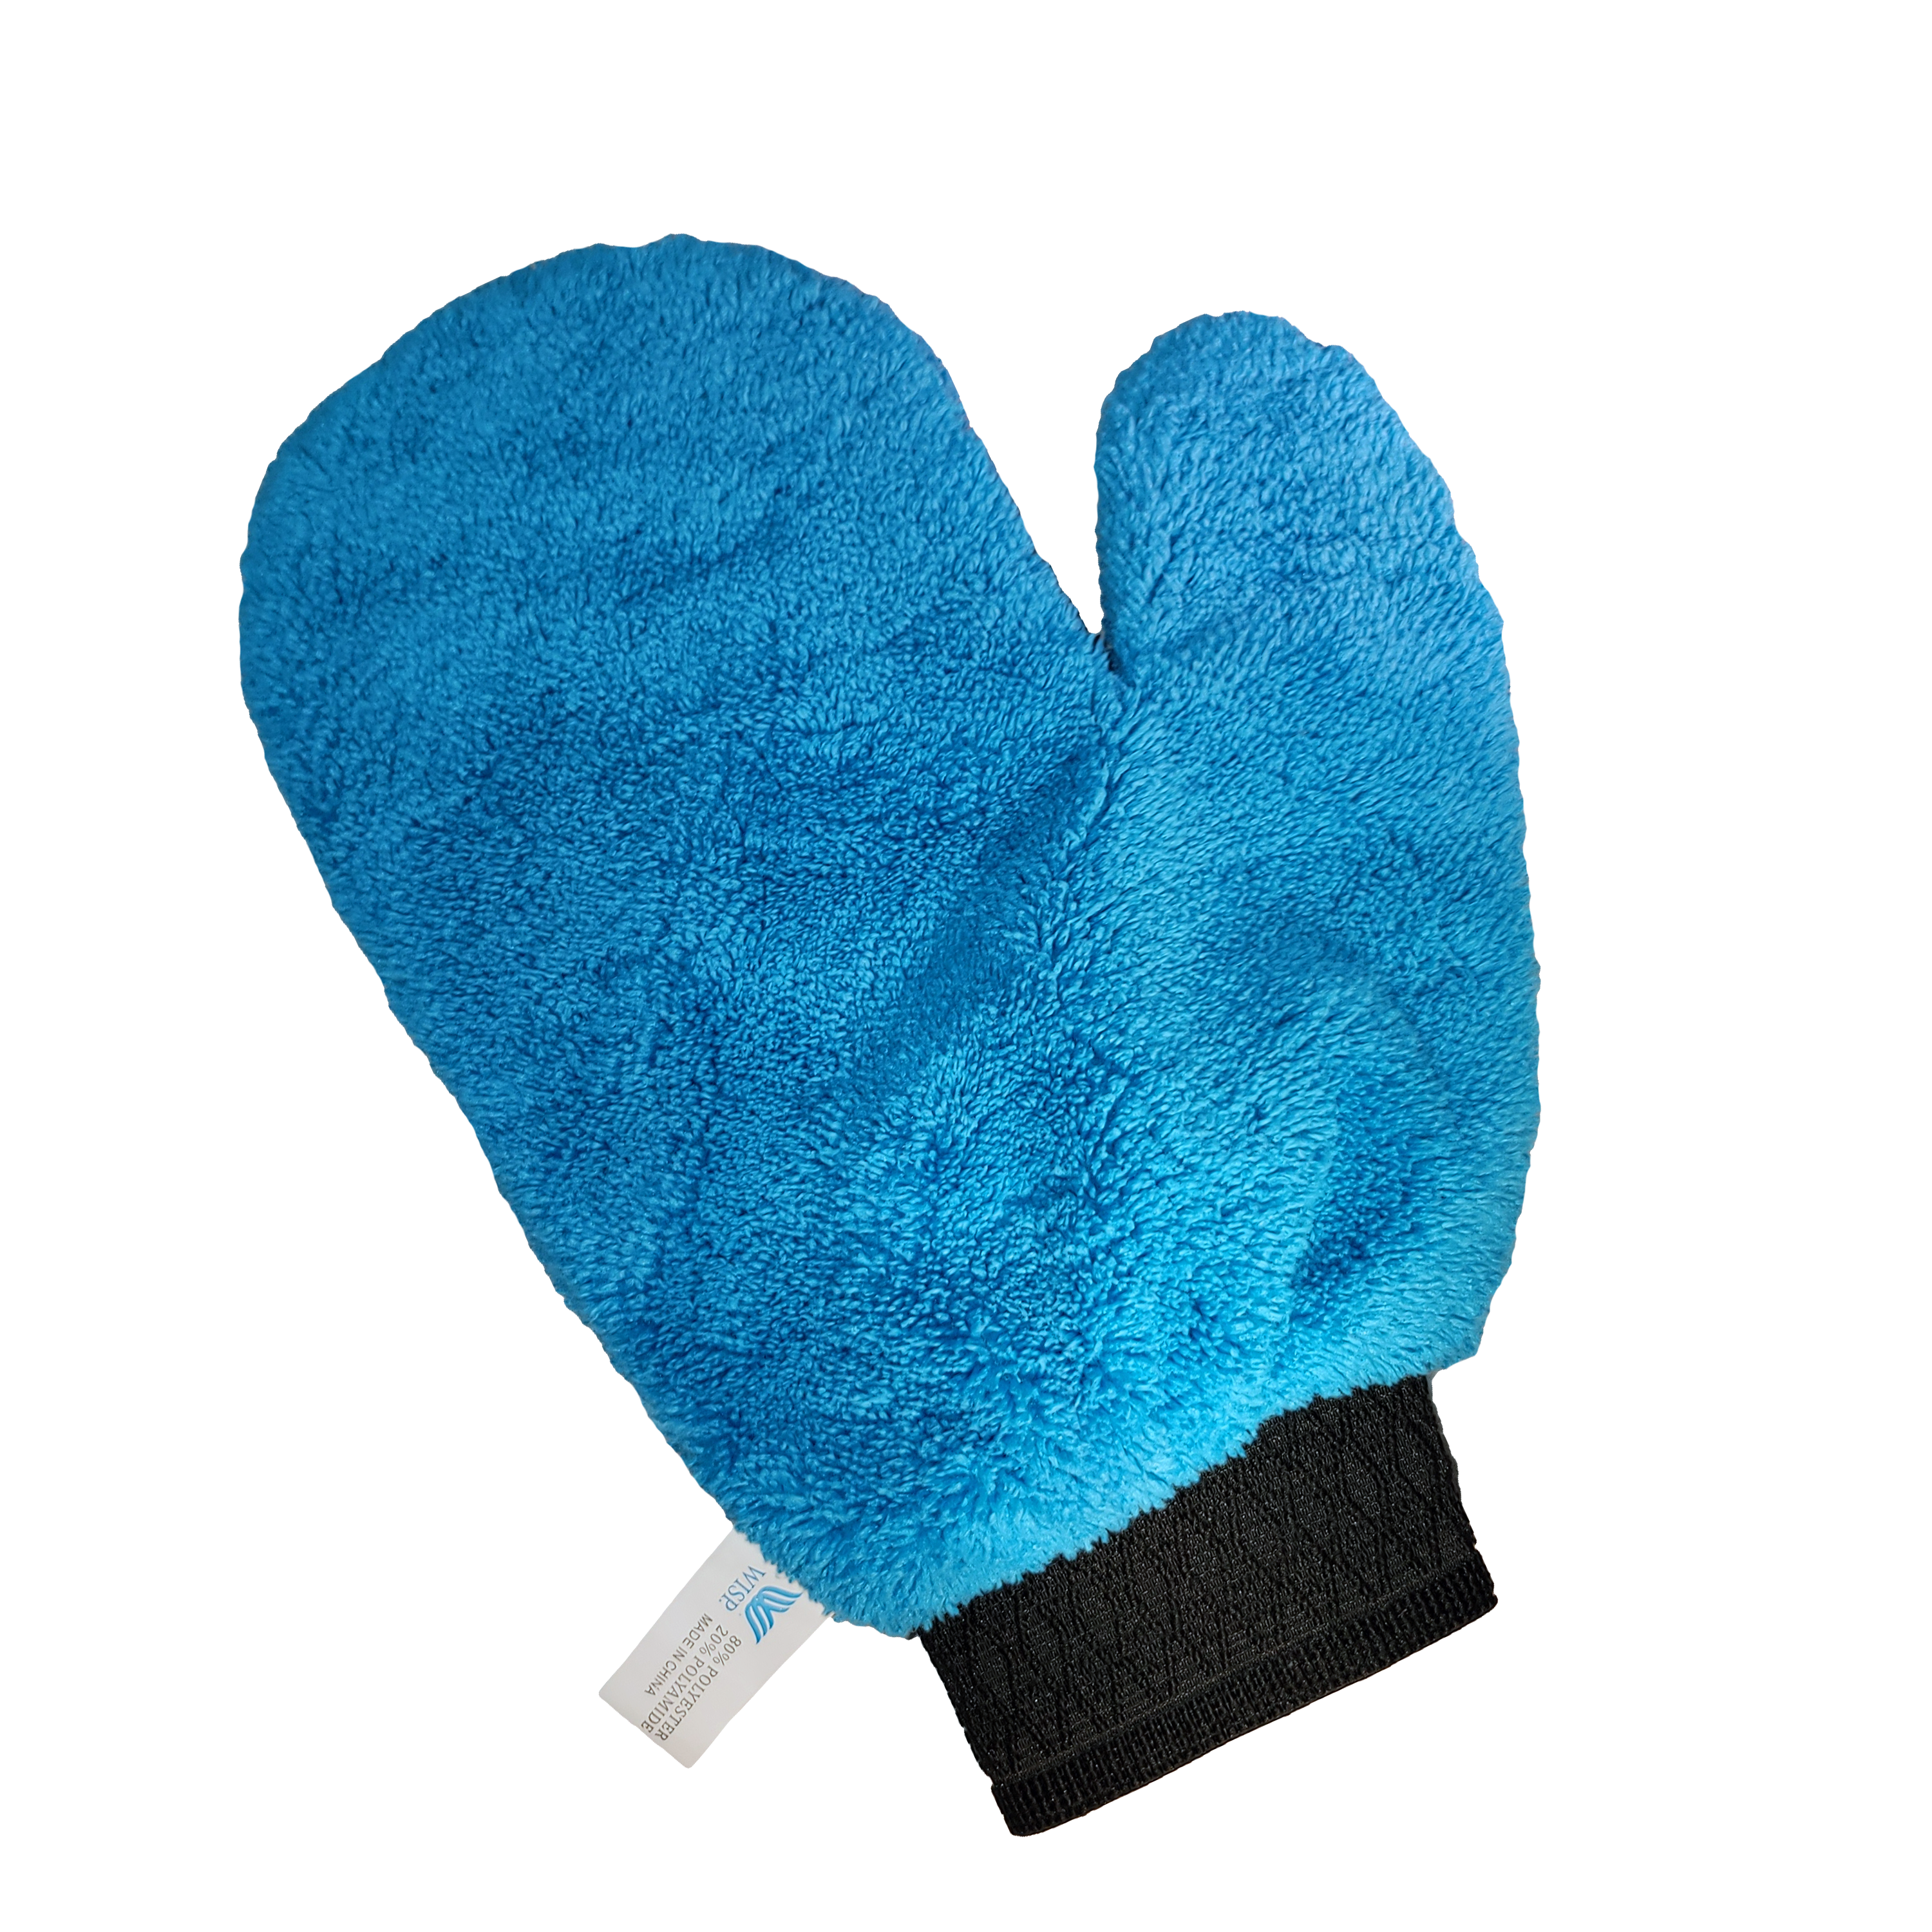 1 pair Microfiber Dusting Cleaning Gloves for Washable Mittens Kitchen  House Cars Trucks Mirrors Lamps Blinds Auto, Blue